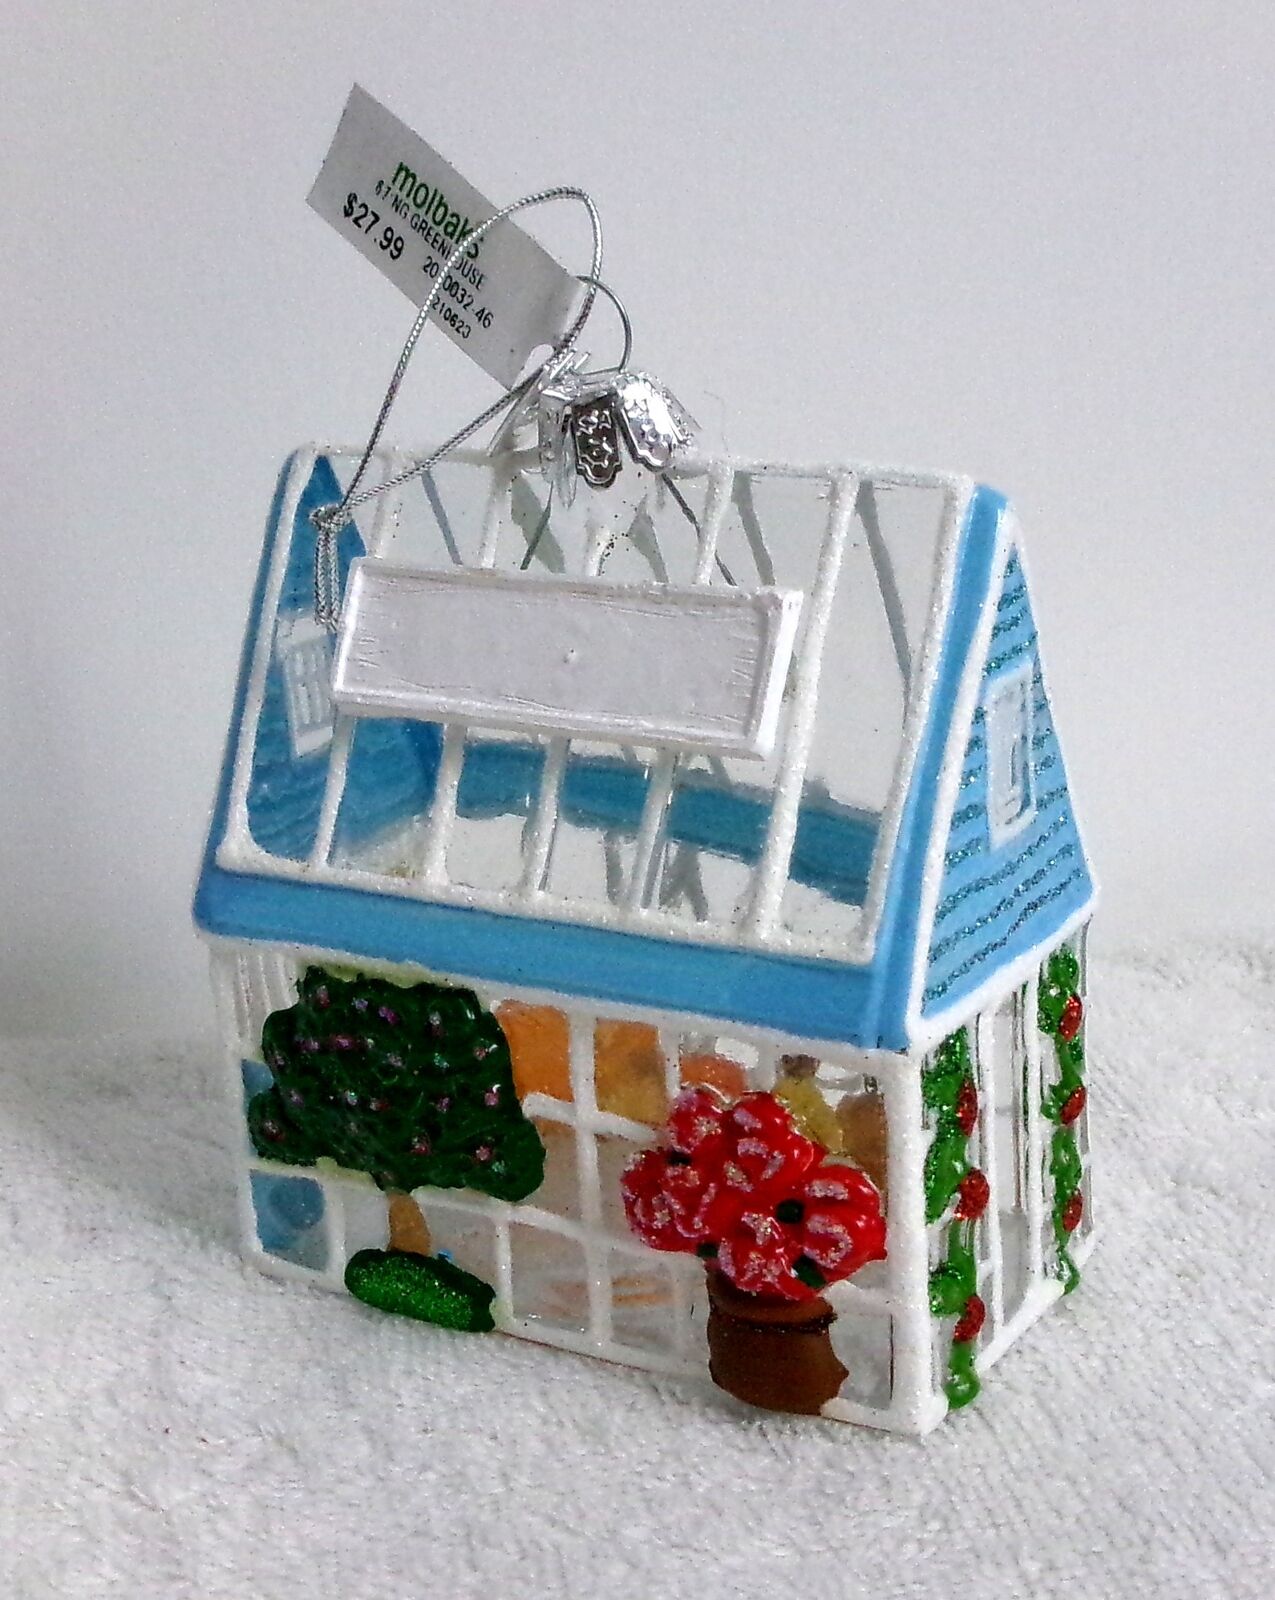 LOVE TO GARDEN? GREAT GIFT DETAILED, COLORFUL GREENHOUSE CHRISTMAS ORNAMENT NEW